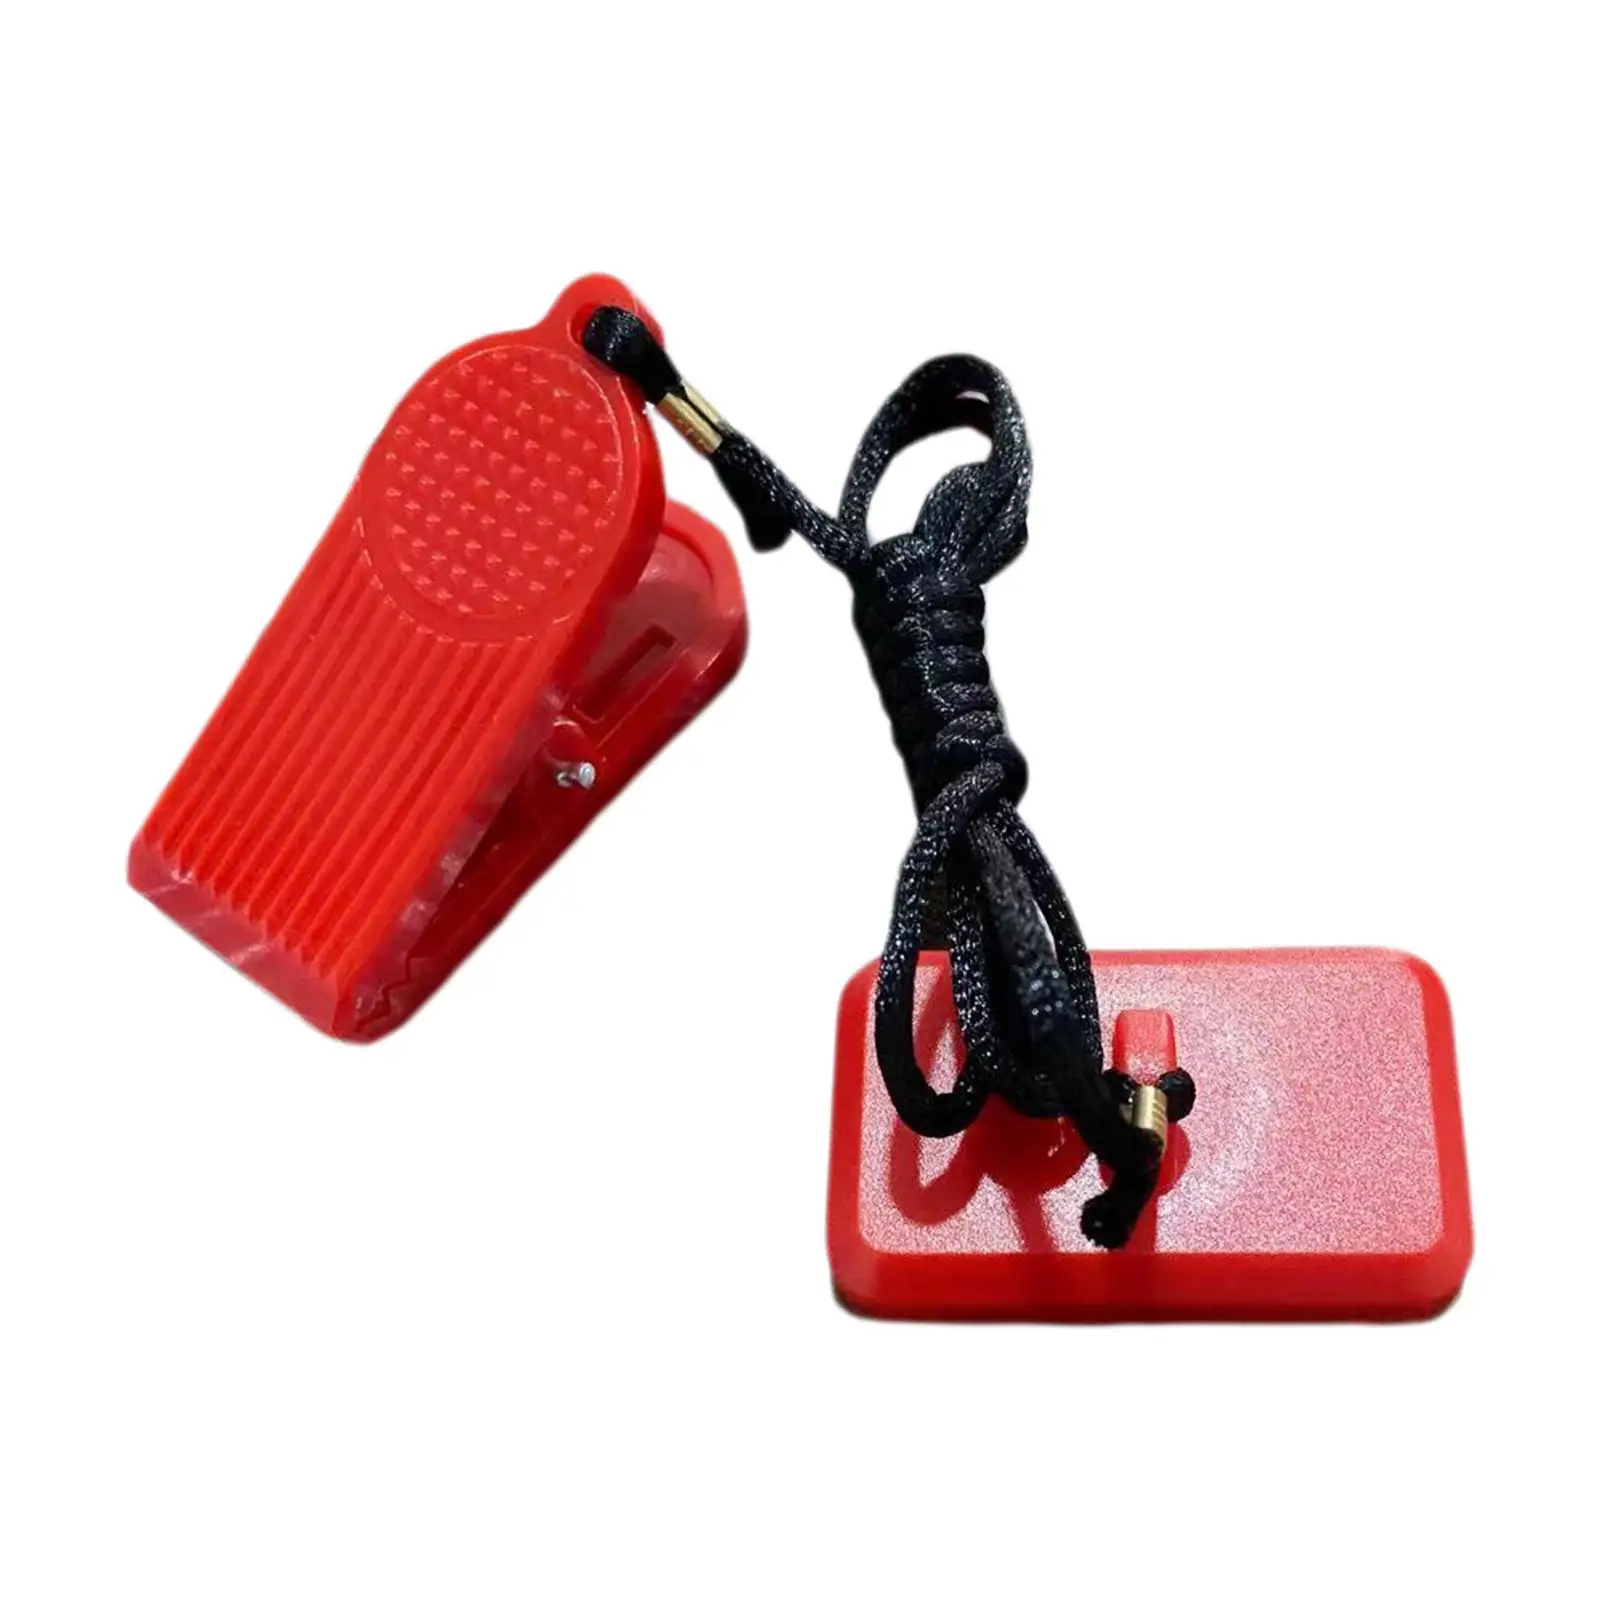 

Magnet Security Lock Emergency Stop Switch Treadmill Safety Key for Training Gym Use Exercise Workout Running Machine